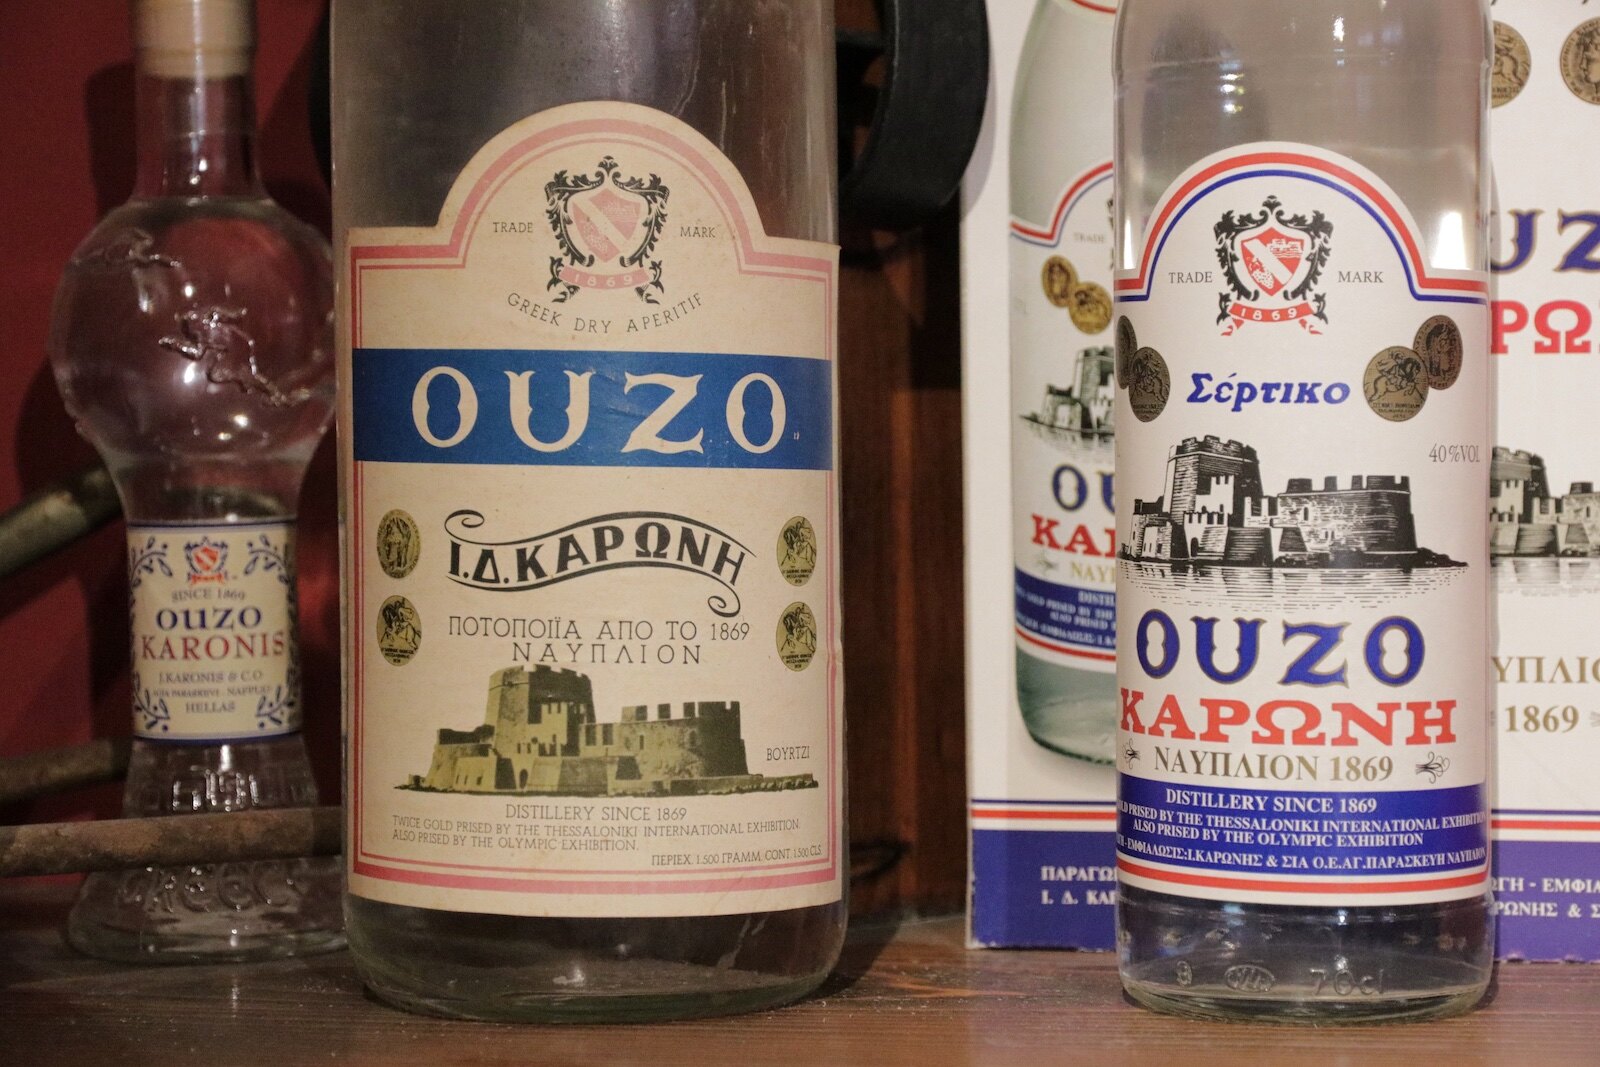 Old bottles of Ouzo at Karonis distillery museum